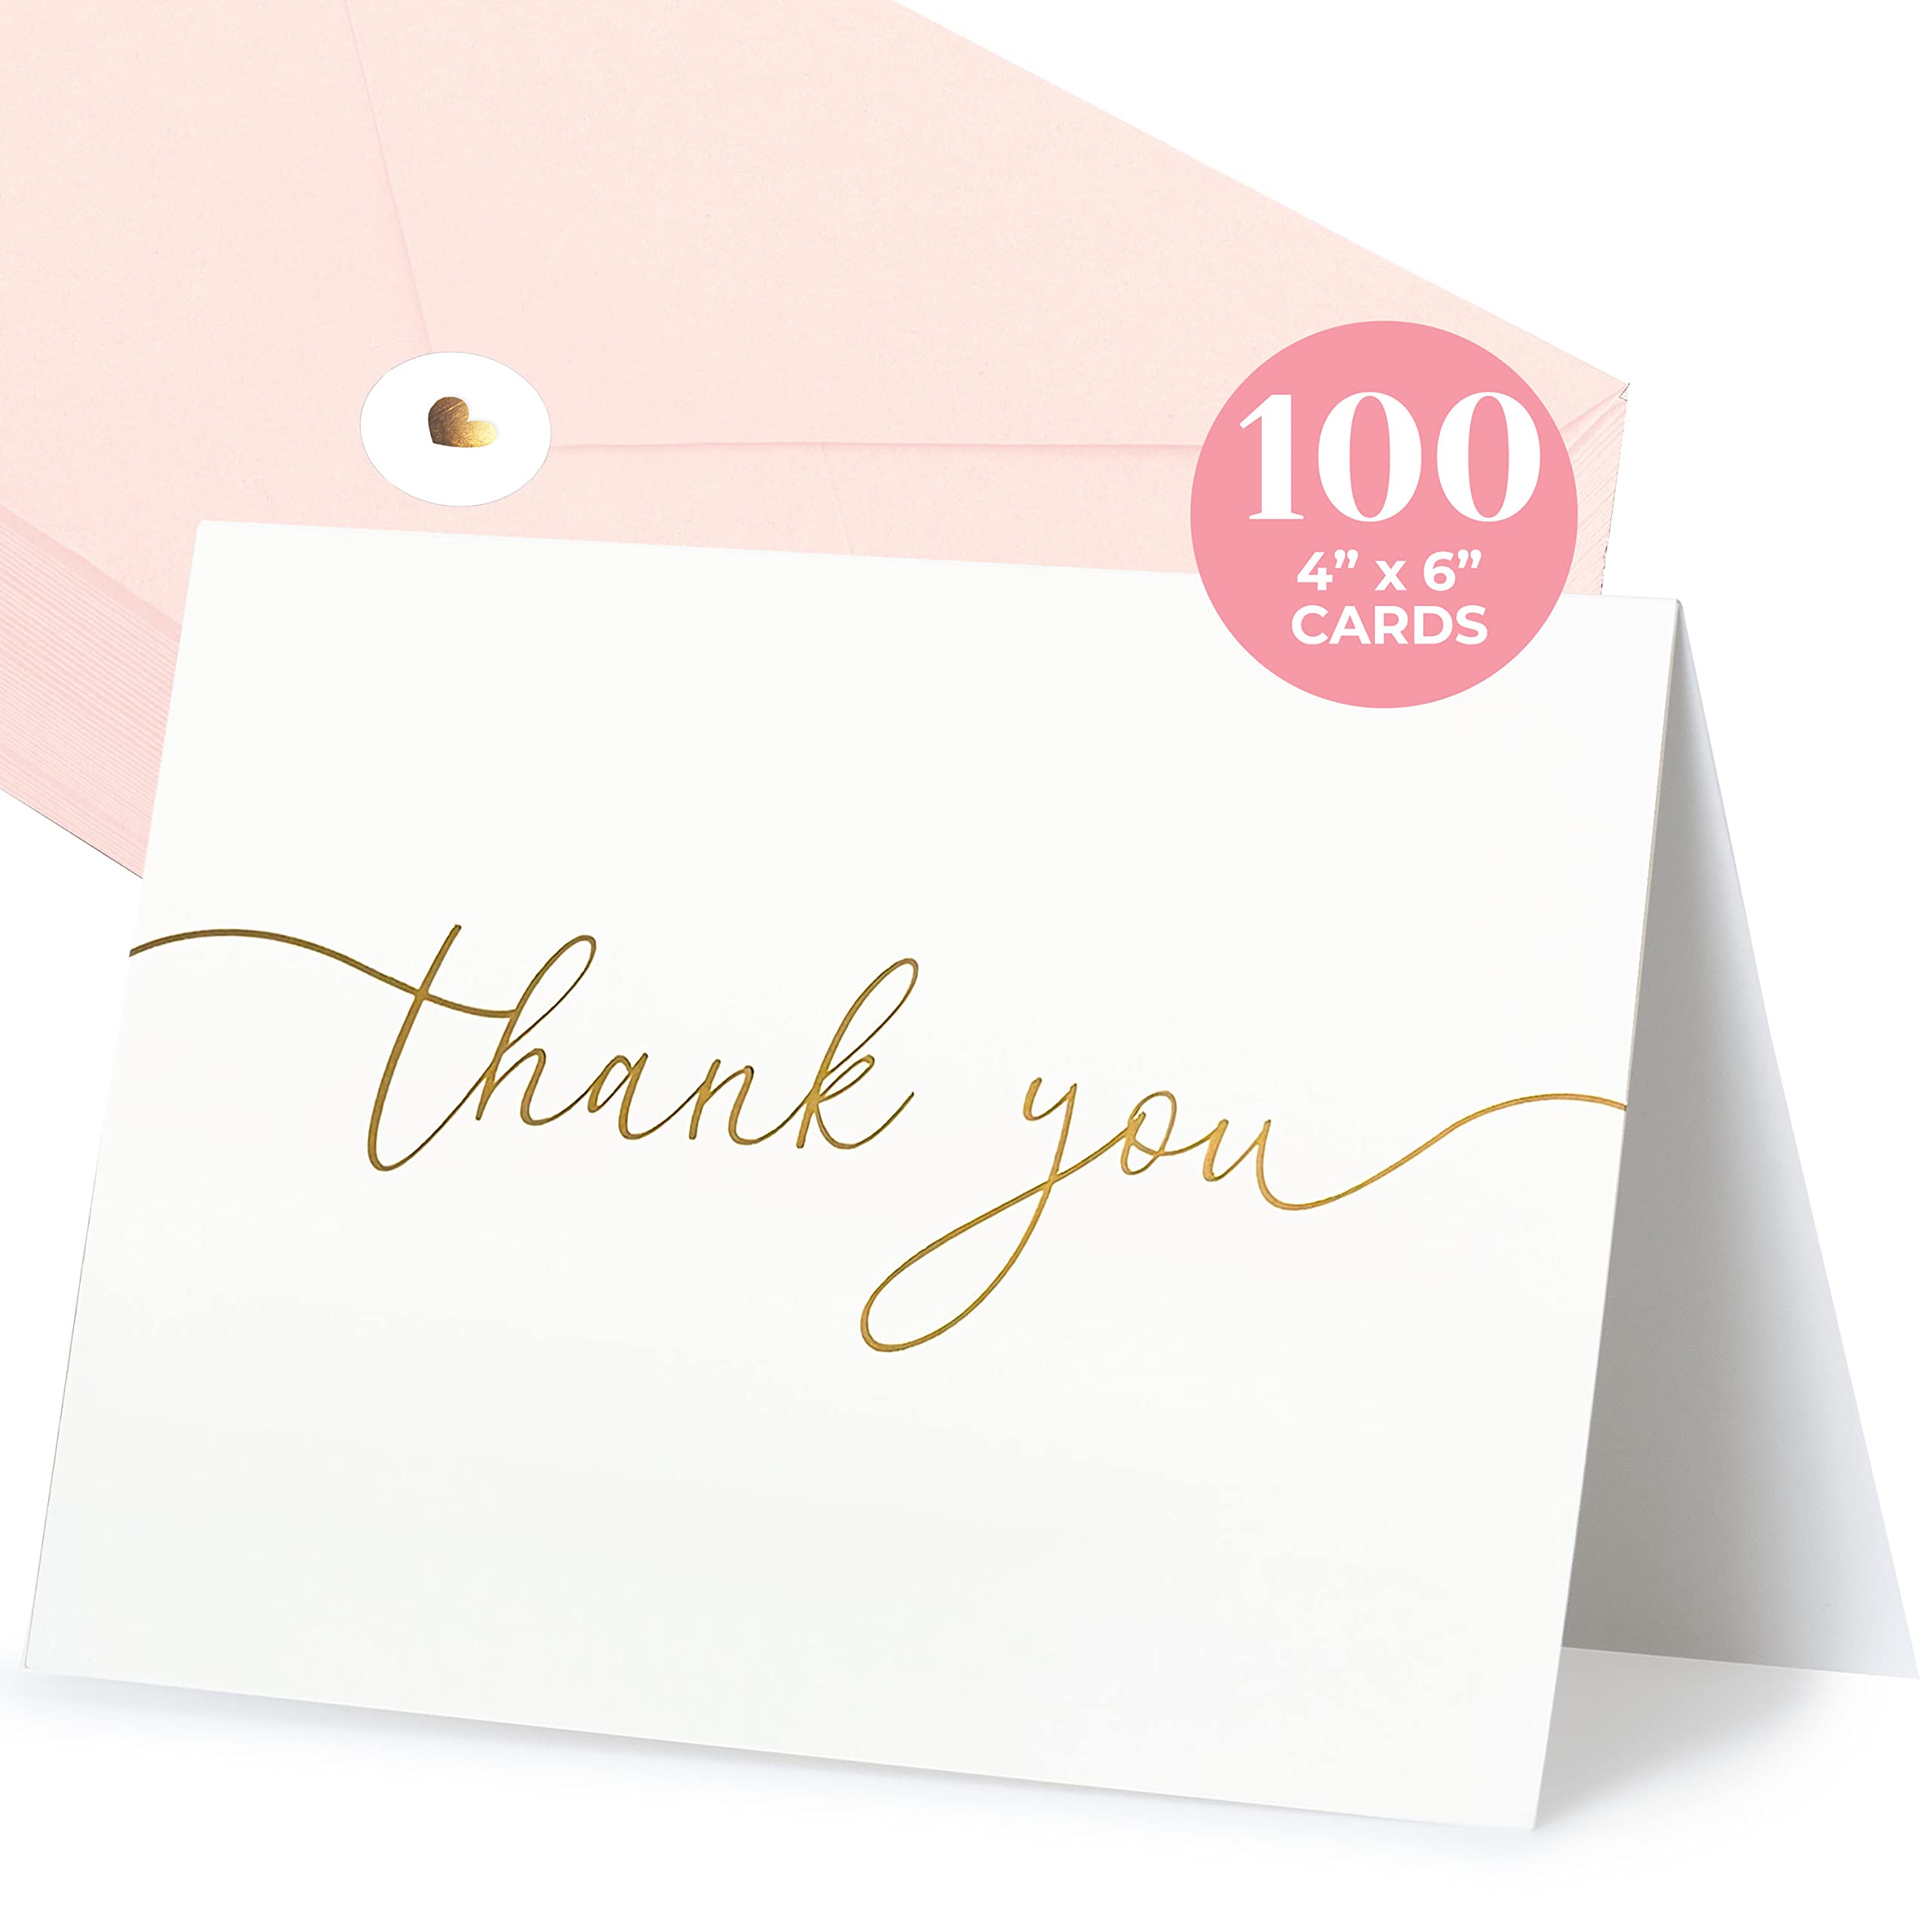 100 Bulk Thank You Cards with Envelopes - Blank Cards and Envelopes - Thank You Cards Wedding with Envelopes Set - Gold Script Thank You Notes - Thank You Cards Bridal Shower (4 x 6 Inches) (100 Pack)